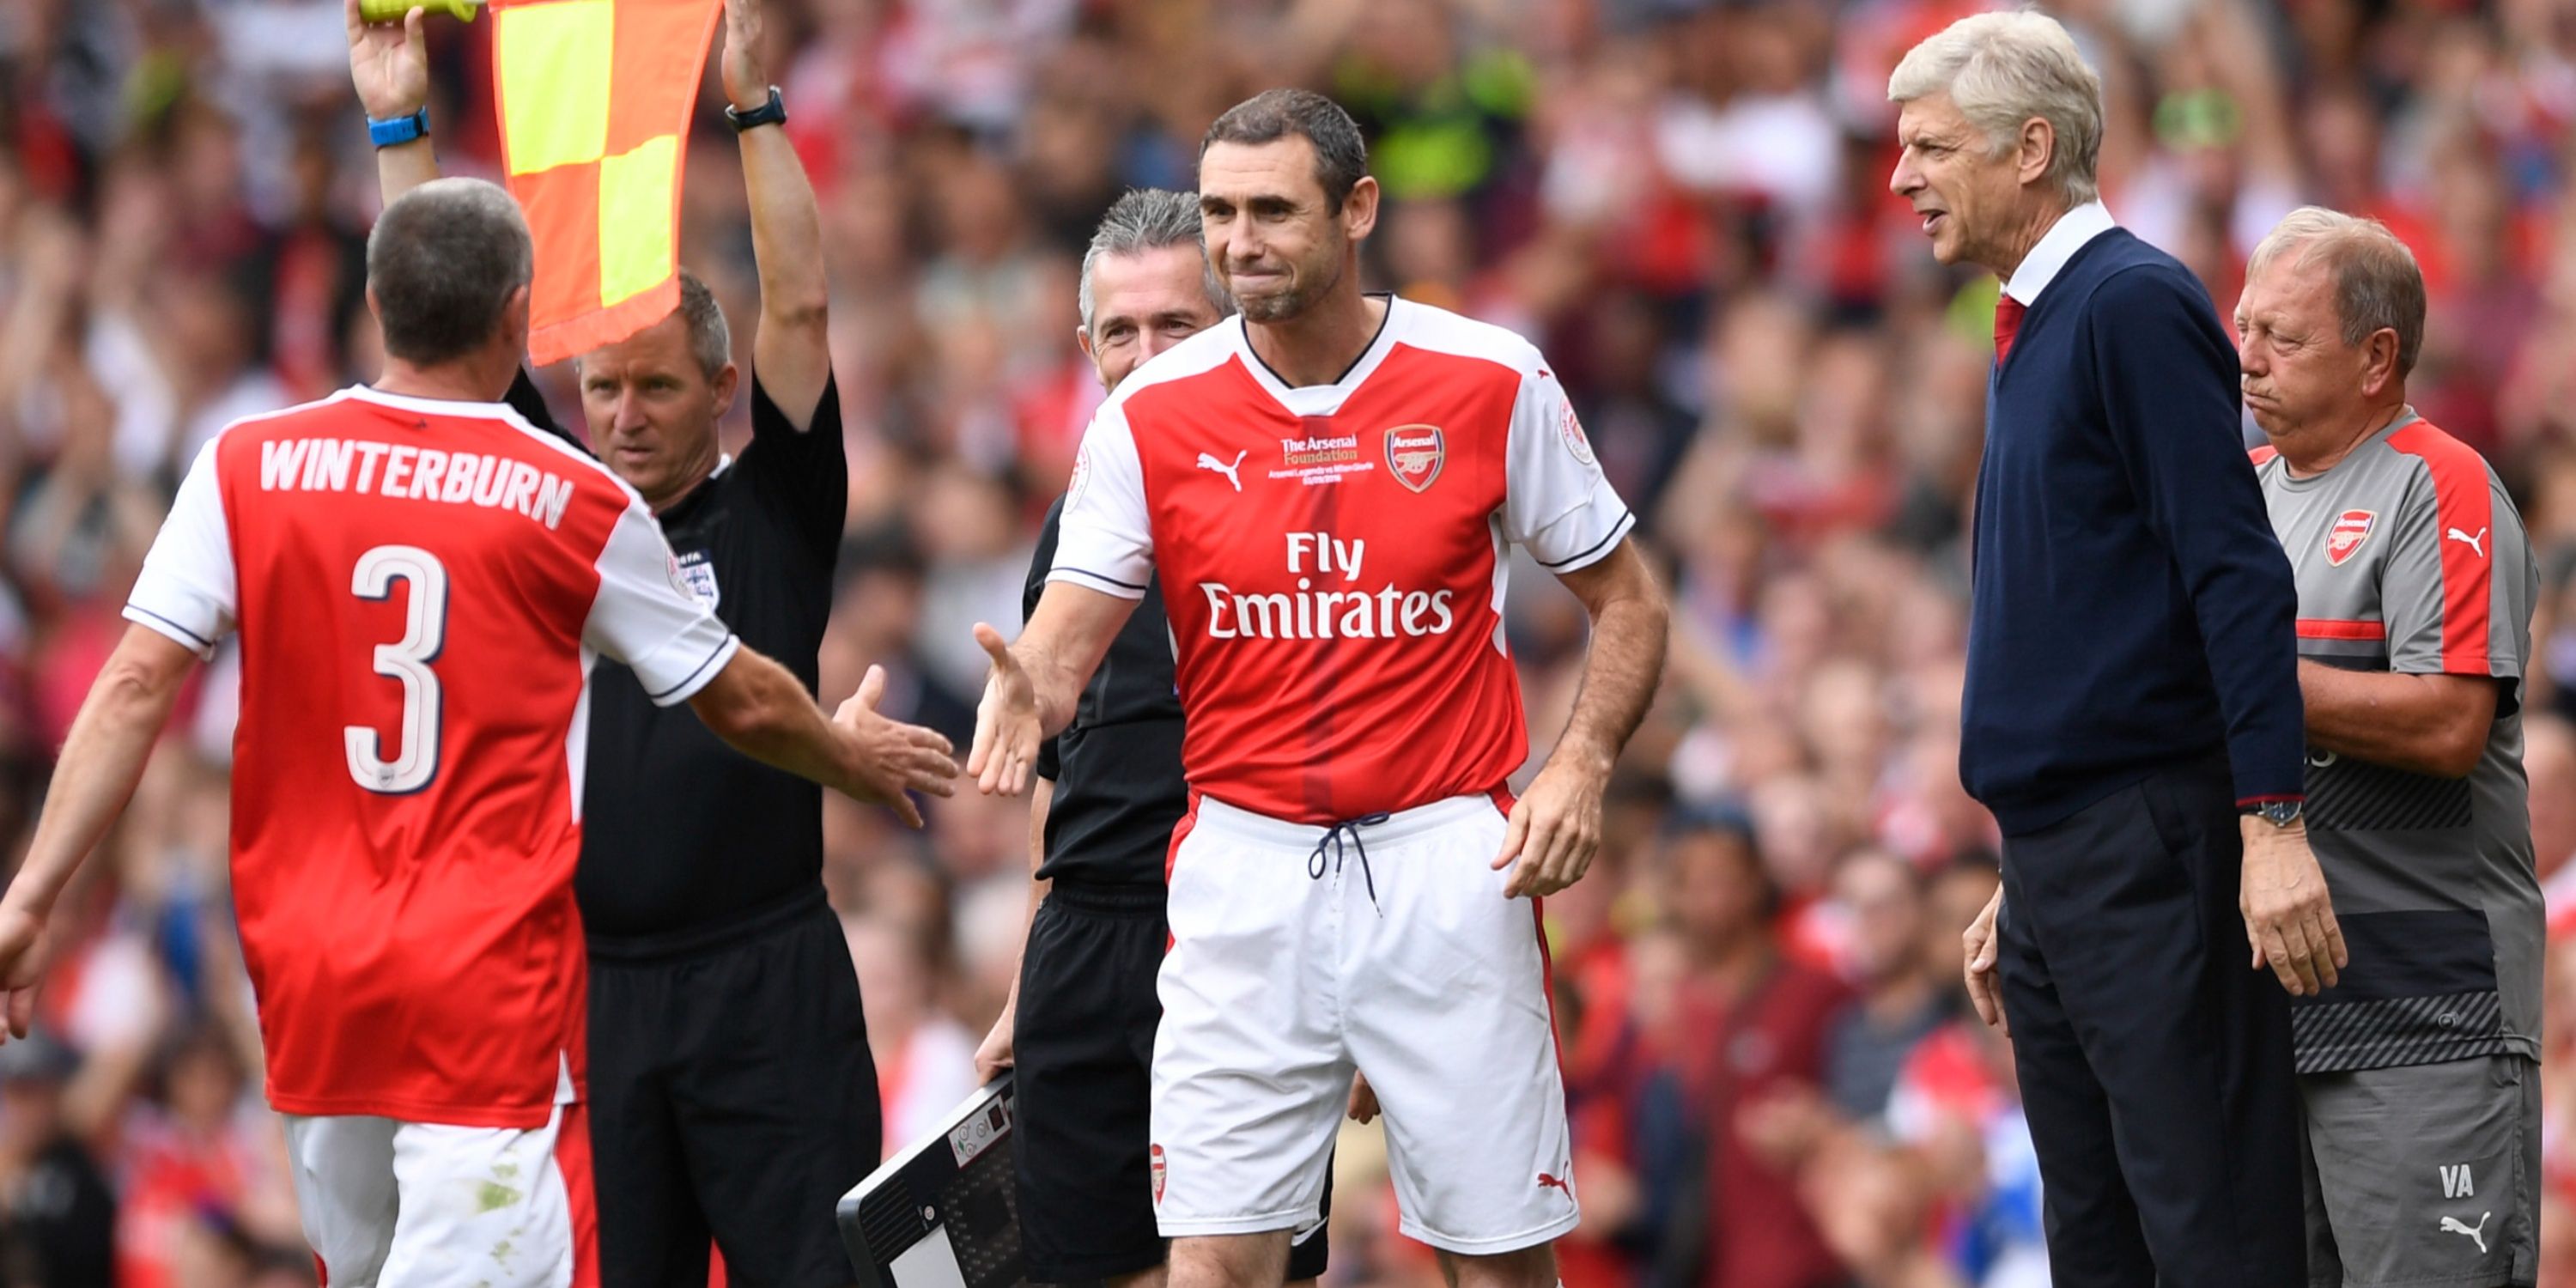 Arsenal's Martin Keown coming on as a substitute